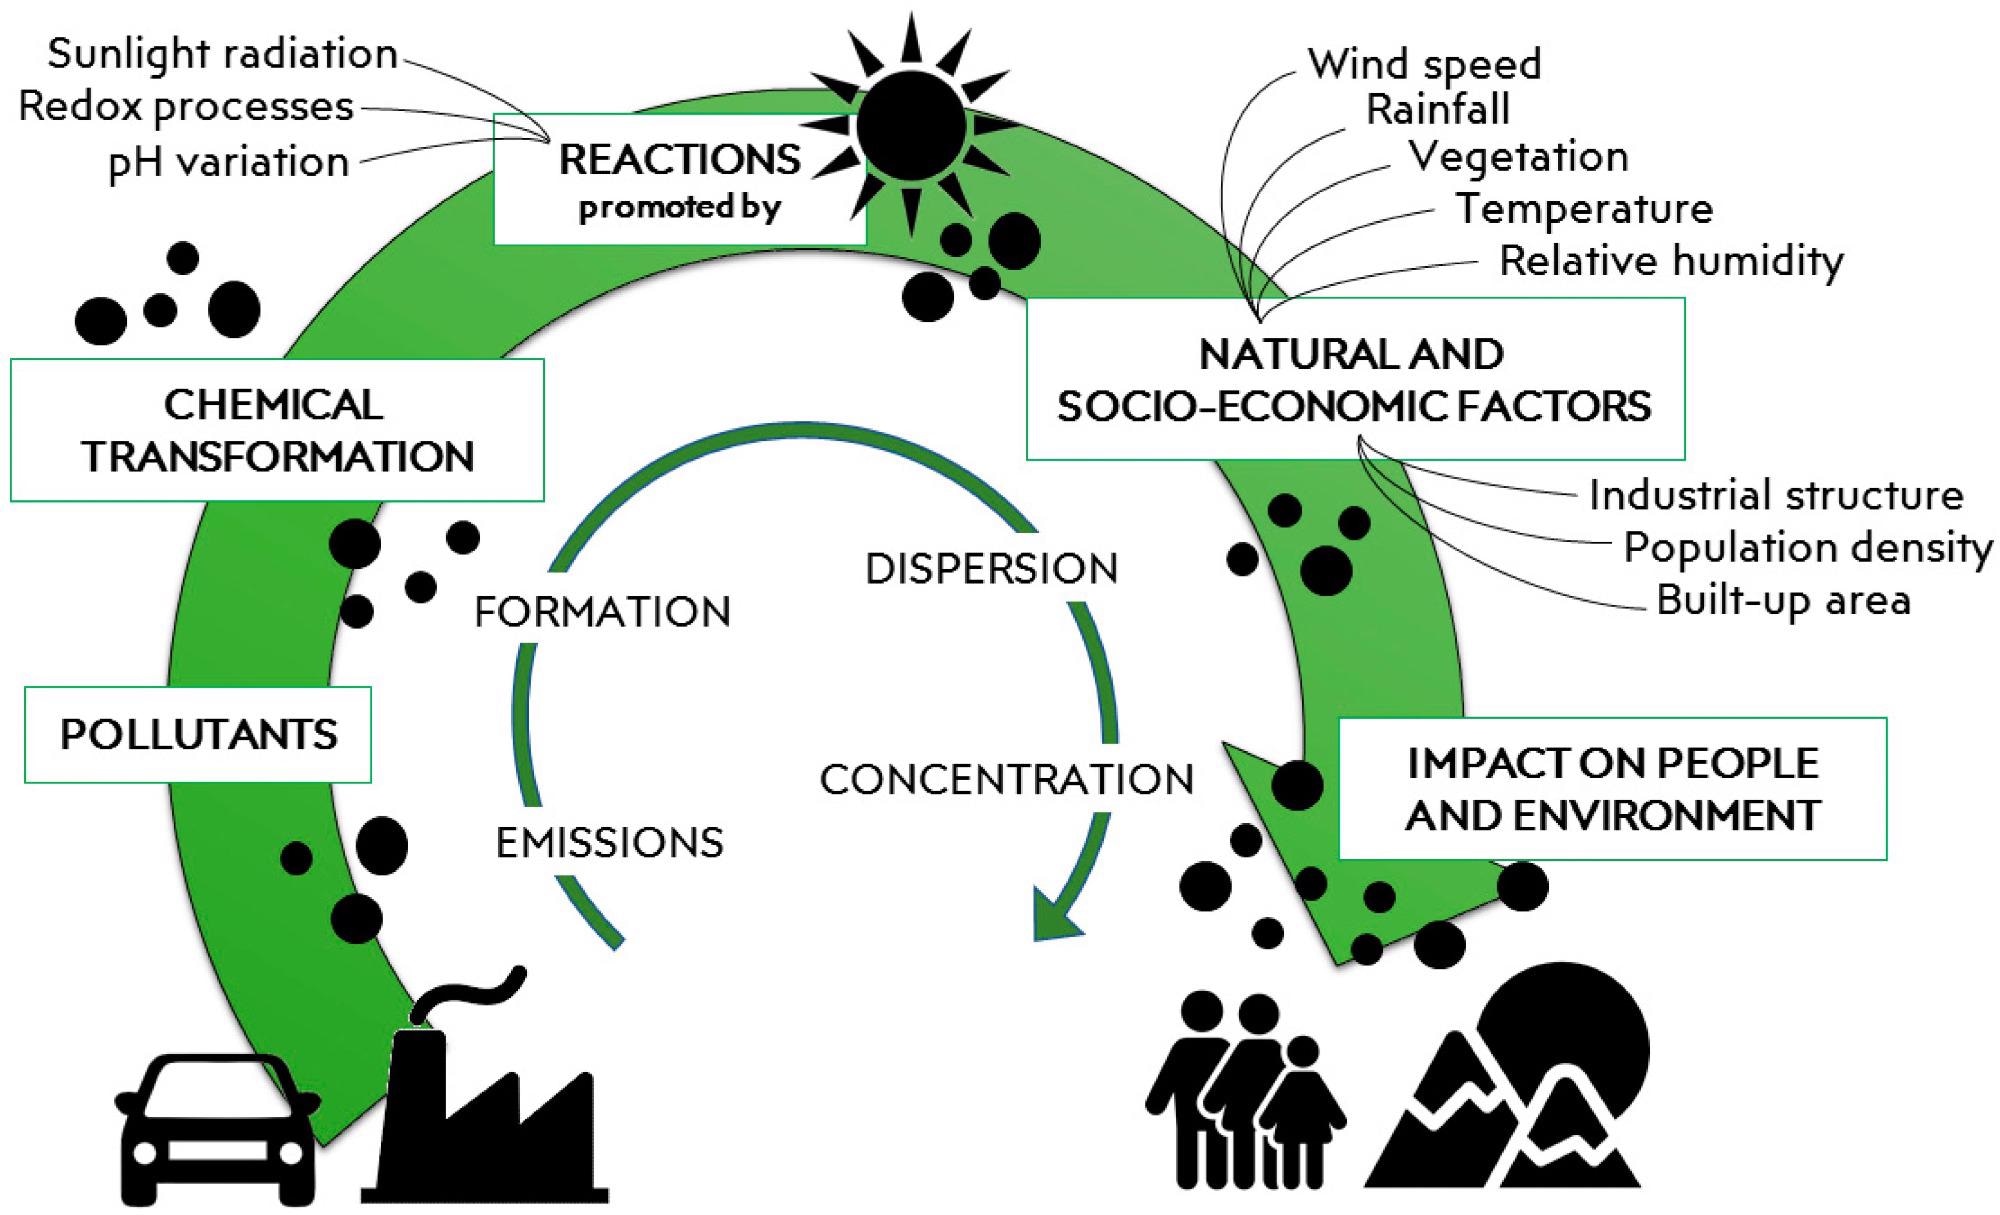 Cycle of pollution from the emission to the impact on people and environment.